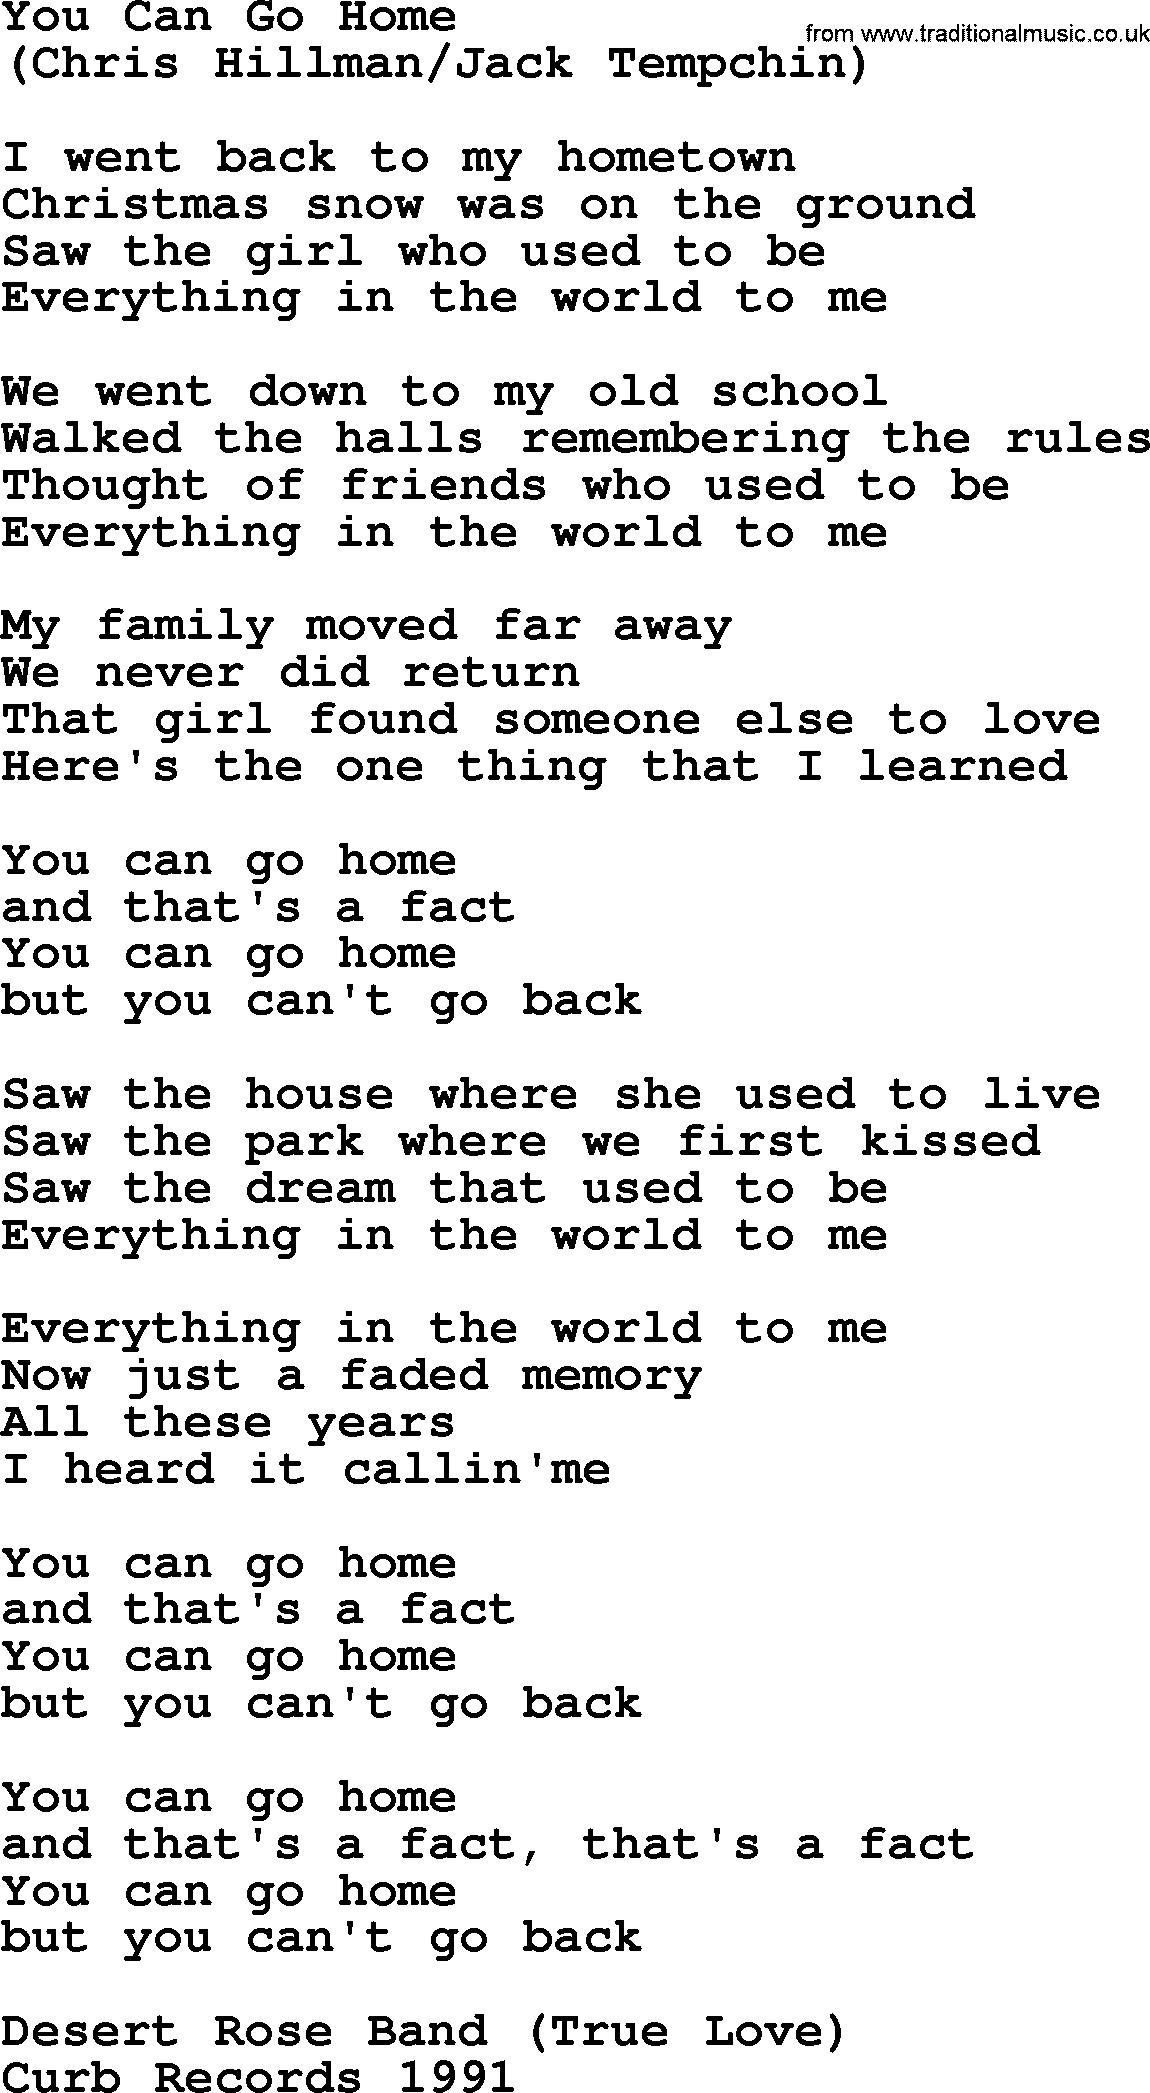 The Byrds song You Can Go Home, lyrics